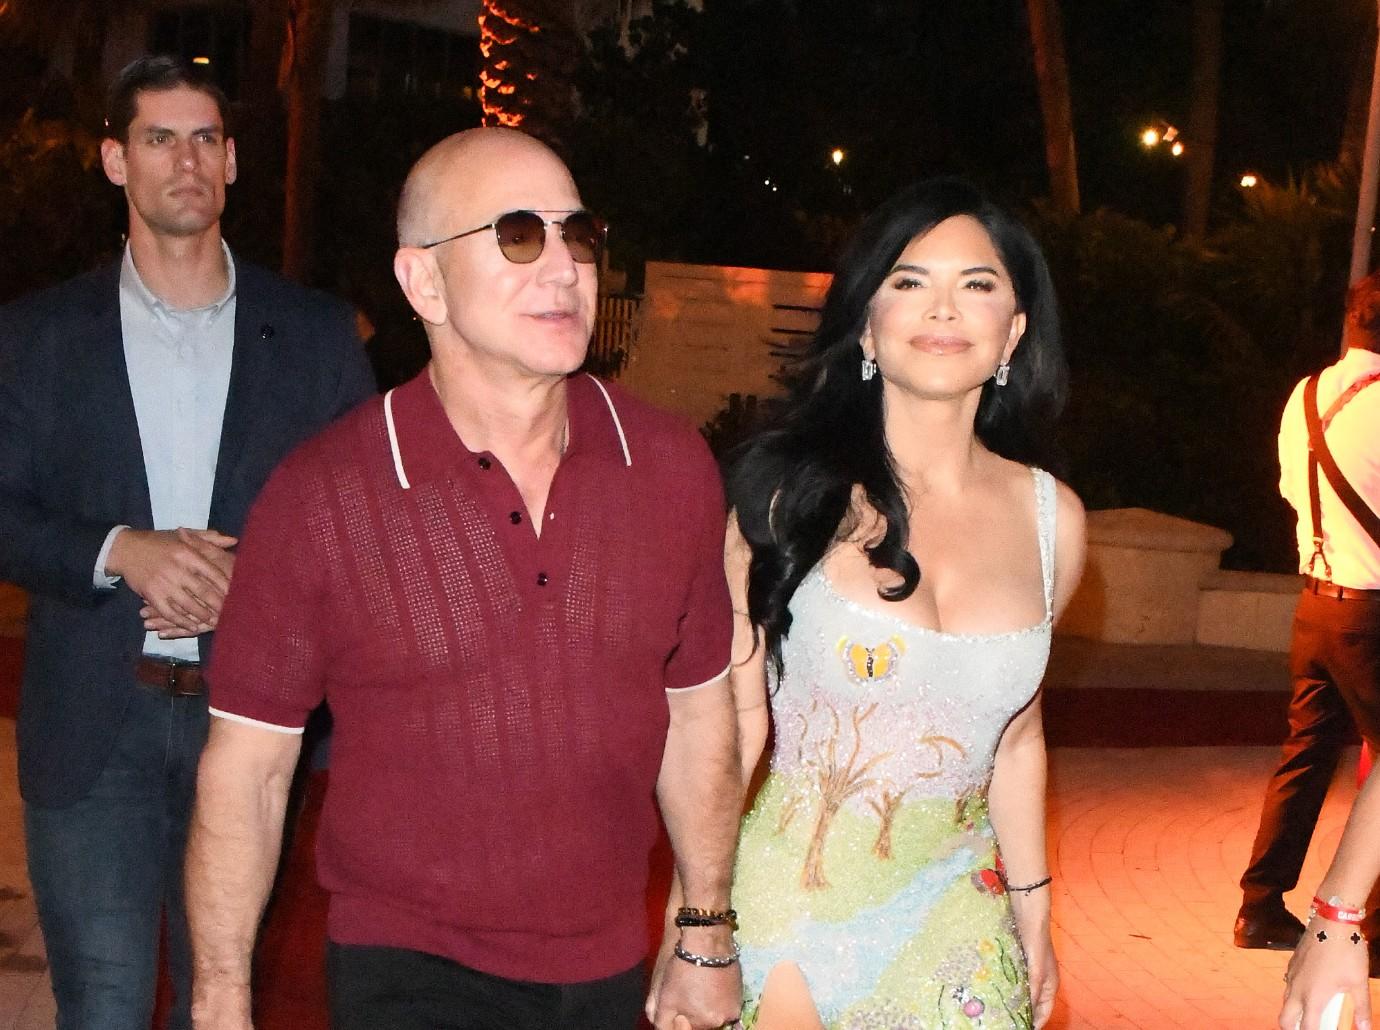 Jeff Bezos And Lauren Sanchez Engaged After 5 Years Of Dating Report 2595